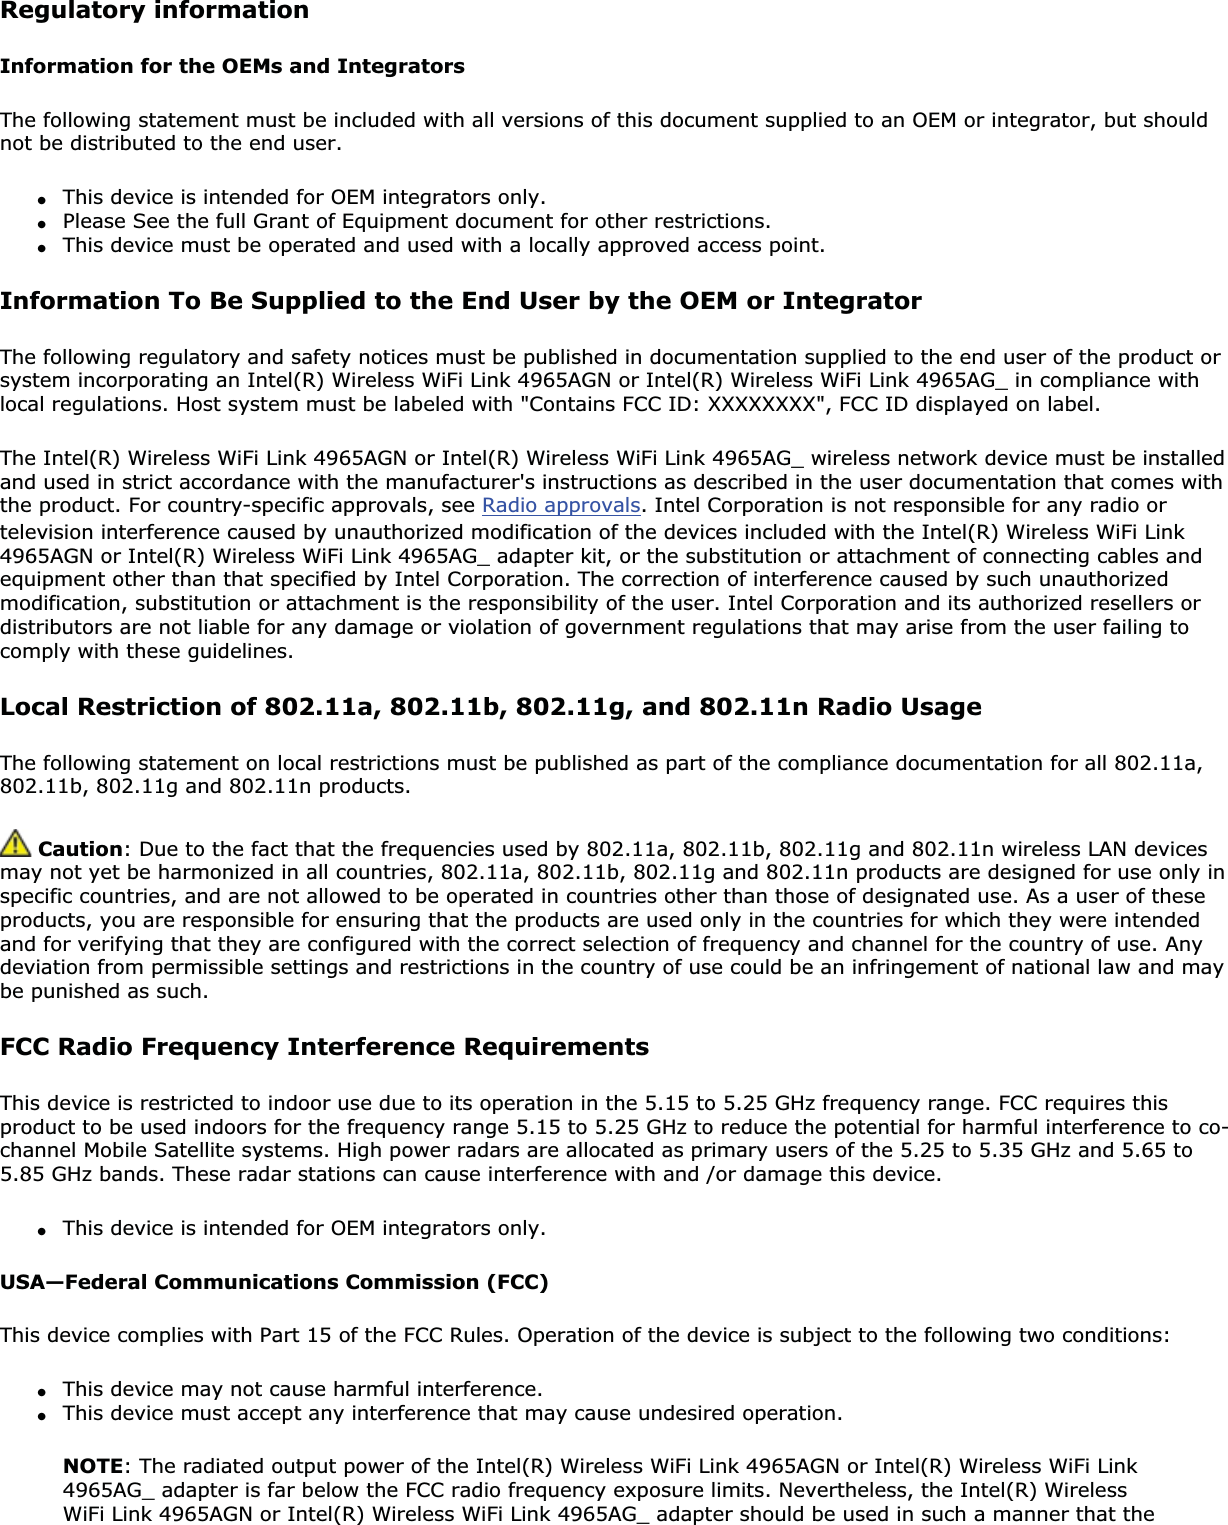 Regulatory informationInformation for the OEMs and IntegratorsThe following statement must be included with all versions of this document supplied to an OEM or integrator, but should not be distributed to the end user.●This device is intended for OEM integrators only.●Please See the full Grant of Equipment document for other restrictions.●This device must be operated and used with a locally approved access point.Information To Be Supplied to the End User by the OEM or IntegratorThe following regulatory and safety notices must be published in documentation supplied to the end user of the product or system incorporating an Intel(R) Wireless WiFi Link 4965AGN or Intel(R) Wireless WiFi Link 4965AG_ in compliance with local regulations. Host system must be labeled with &quot;Contains FCC ID: XXXXXXXX&quot;, FCC ID displayed on label.The Intel(R) Wireless WiFi Link 4965AGN or Intel(R) Wireless WiFi Link 4965AG_ wireless network device must be installed and used in strict accordance with the manufacturer&apos;s instructions as described in the user documentation that comes with the product. For country-specific approvals, see Radio approvals. Intel Corporation is not responsible for any radio or television interference caused by unauthorized modification of the devices included with the Intel(R) Wireless WiFi Link 4965AGN or Intel(R) Wireless WiFi Link 4965AG_ adapter kit, or the substitution or attachment of connecting cables and equipment other than that specified by Intel Corporation. The correction of interference caused by such unauthorized modification, substitution or attachment is the responsibility of the user. Intel Corporation and its authorized resellers or distributors are not liable for any damage or violation of government regulations that may arise from the user failing to comply with these guidelines.Local Restriction of 802.11a, 802.11b, 802.11g, and 802.11n Radio UsageThe following statement on local restrictions must be published as part of the compliance documentation for all 802.11a, 802.11b, 802.11g and 802.11n products. Caution: Due to the fact that the frequencies used by 802.11a, 802.11b, 802.11g and 802.11n wireless LAN devices may not yet be harmonized in all countries, 802.11a, 802.11b, 802.11g and 802.11n products are designed for use only in specific countries, and are not allowed to be operated in countries other than those of designated use. As a user of these products, you are responsible for ensuring that the products are used only in the countries for which they were intended and for verifying that they are configured with the correct selection of frequency and channel for the country of use. Any deviation from permissible settings and restrictions in the country of use could be an infringement of national law and may be punished as such.FCC Radio Frequency Interference RequirementsThis device is restricted to indoor use due to its operation in the 5.15 to 5.25 GHz frequency range. FCC requires this product to be used indoors for the frequency range 5.15 to 5.25 GHz to reduce the potential for harmful interference to co-channel Mobile Satellite systems. High power radars are allocated as primary users of the 5.25 to 5.35 GHz and 5.65 to 5.85 GHz bands. These radar stations can cause interference with and /or damage this device.●This device is intended for OEM integrators only.USA—Federal Communications Commission (FCC)This device complies with Part 15 of the FCC Rules. Operation of the device is subject to the following two conditions:●This device may not cause harmful interference.●This device must accept any interference that may cause undesired operation.NOTE: The radiated output power of the Intel(R) Wireless WiFi Link 4965AGN or Intel(R) Wireless WiFi Link 4965AG_ adapter is far below the FCC radio frequency exposure limits. Nevertheless, the Intel(R) Wireless WiFi Link 4965AGN or Intel(R) Wireless WiFi Link 4965AG_ adapter should be used in such a manner that the 